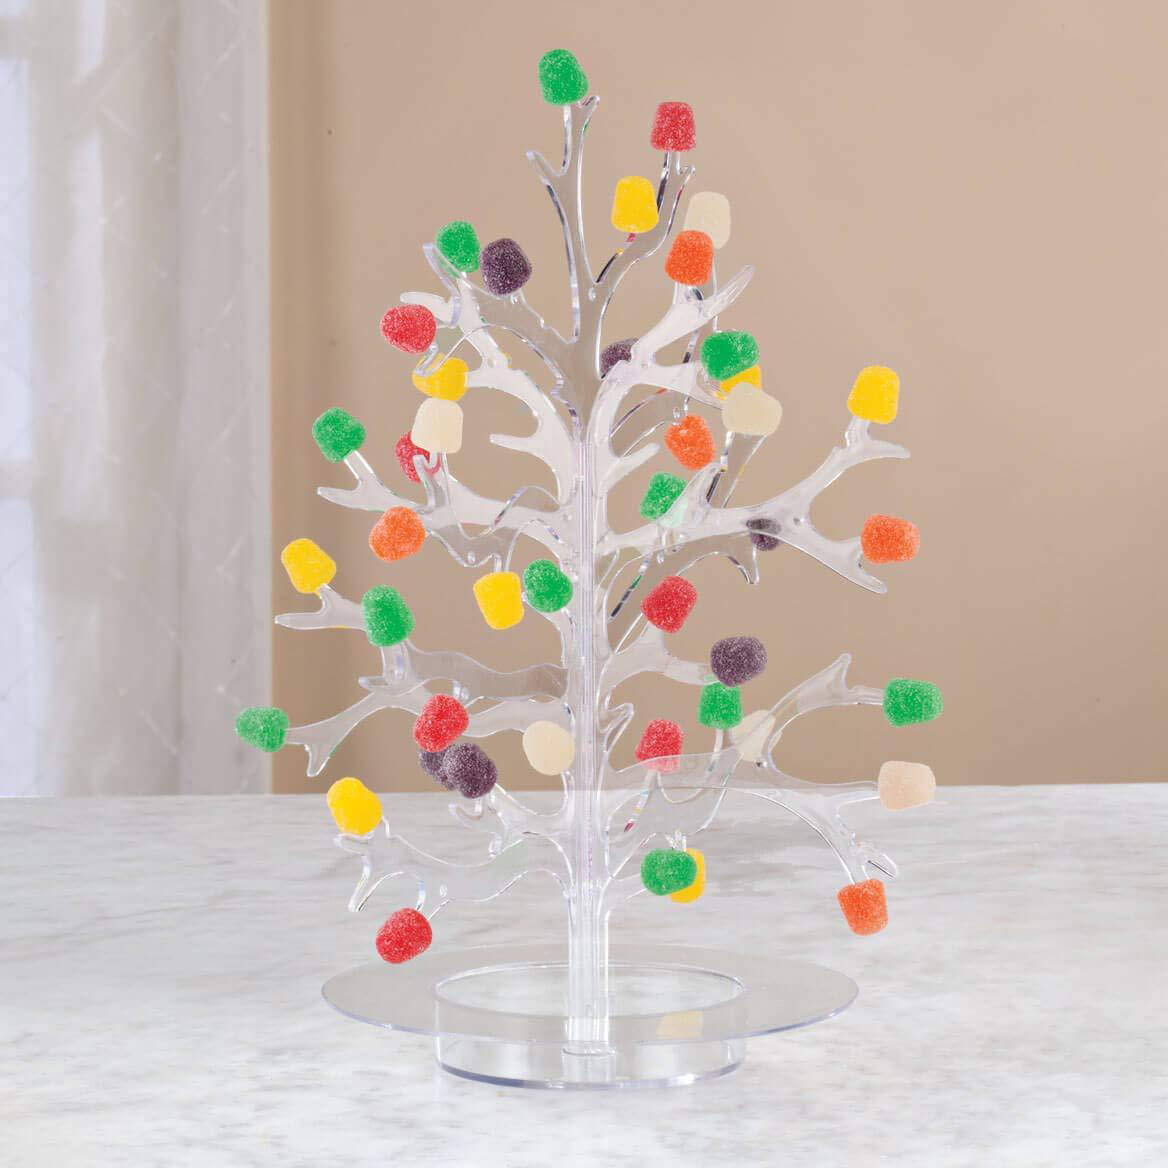 Mini Candy Topper Gumdrop Candy Christmas Tree Ornaments 31 pc 